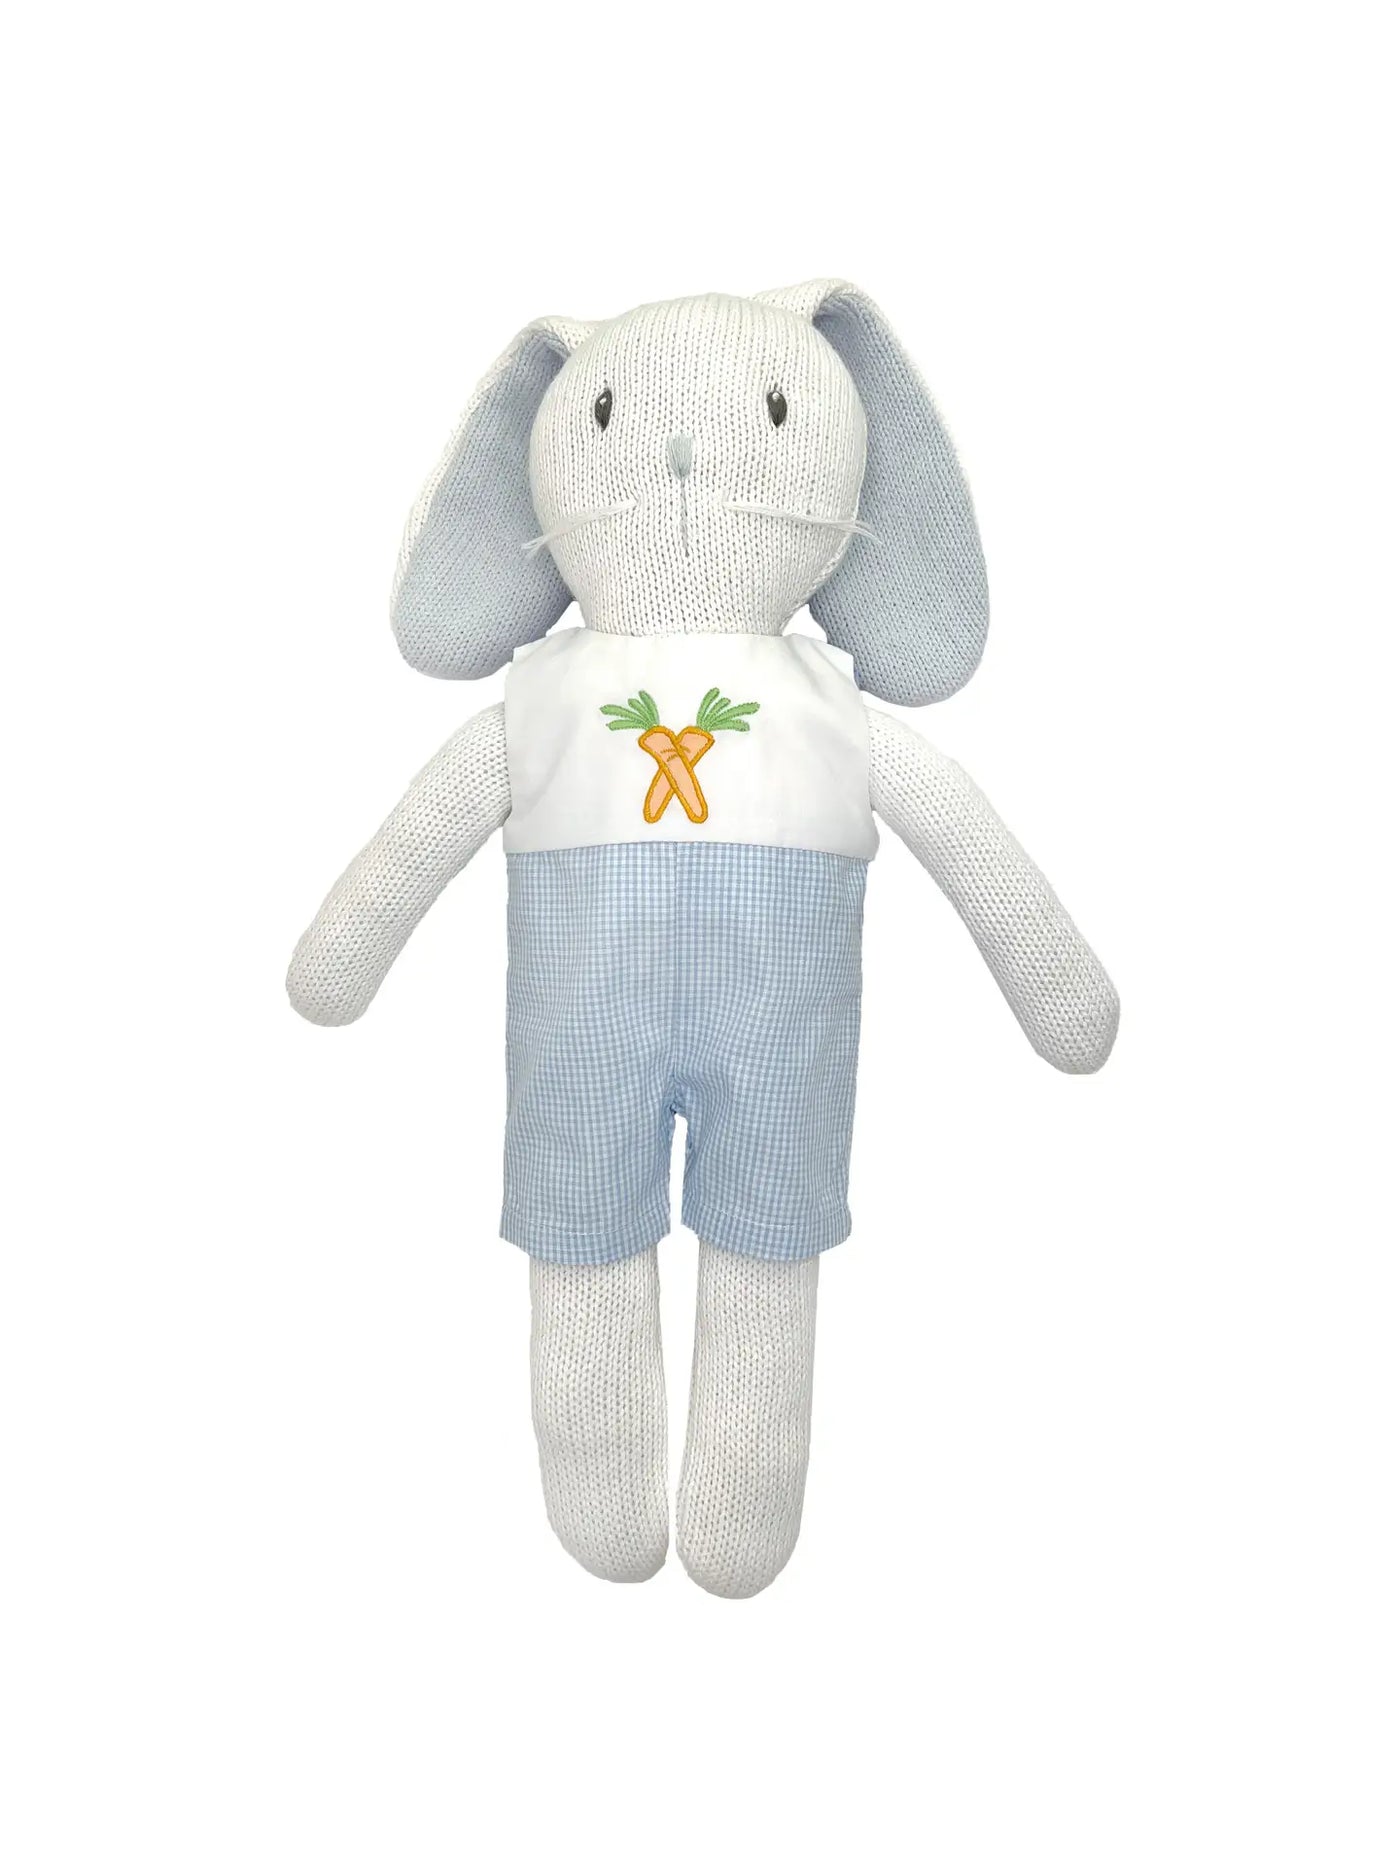 Knit Bunny Doll w/Embroidered Romper